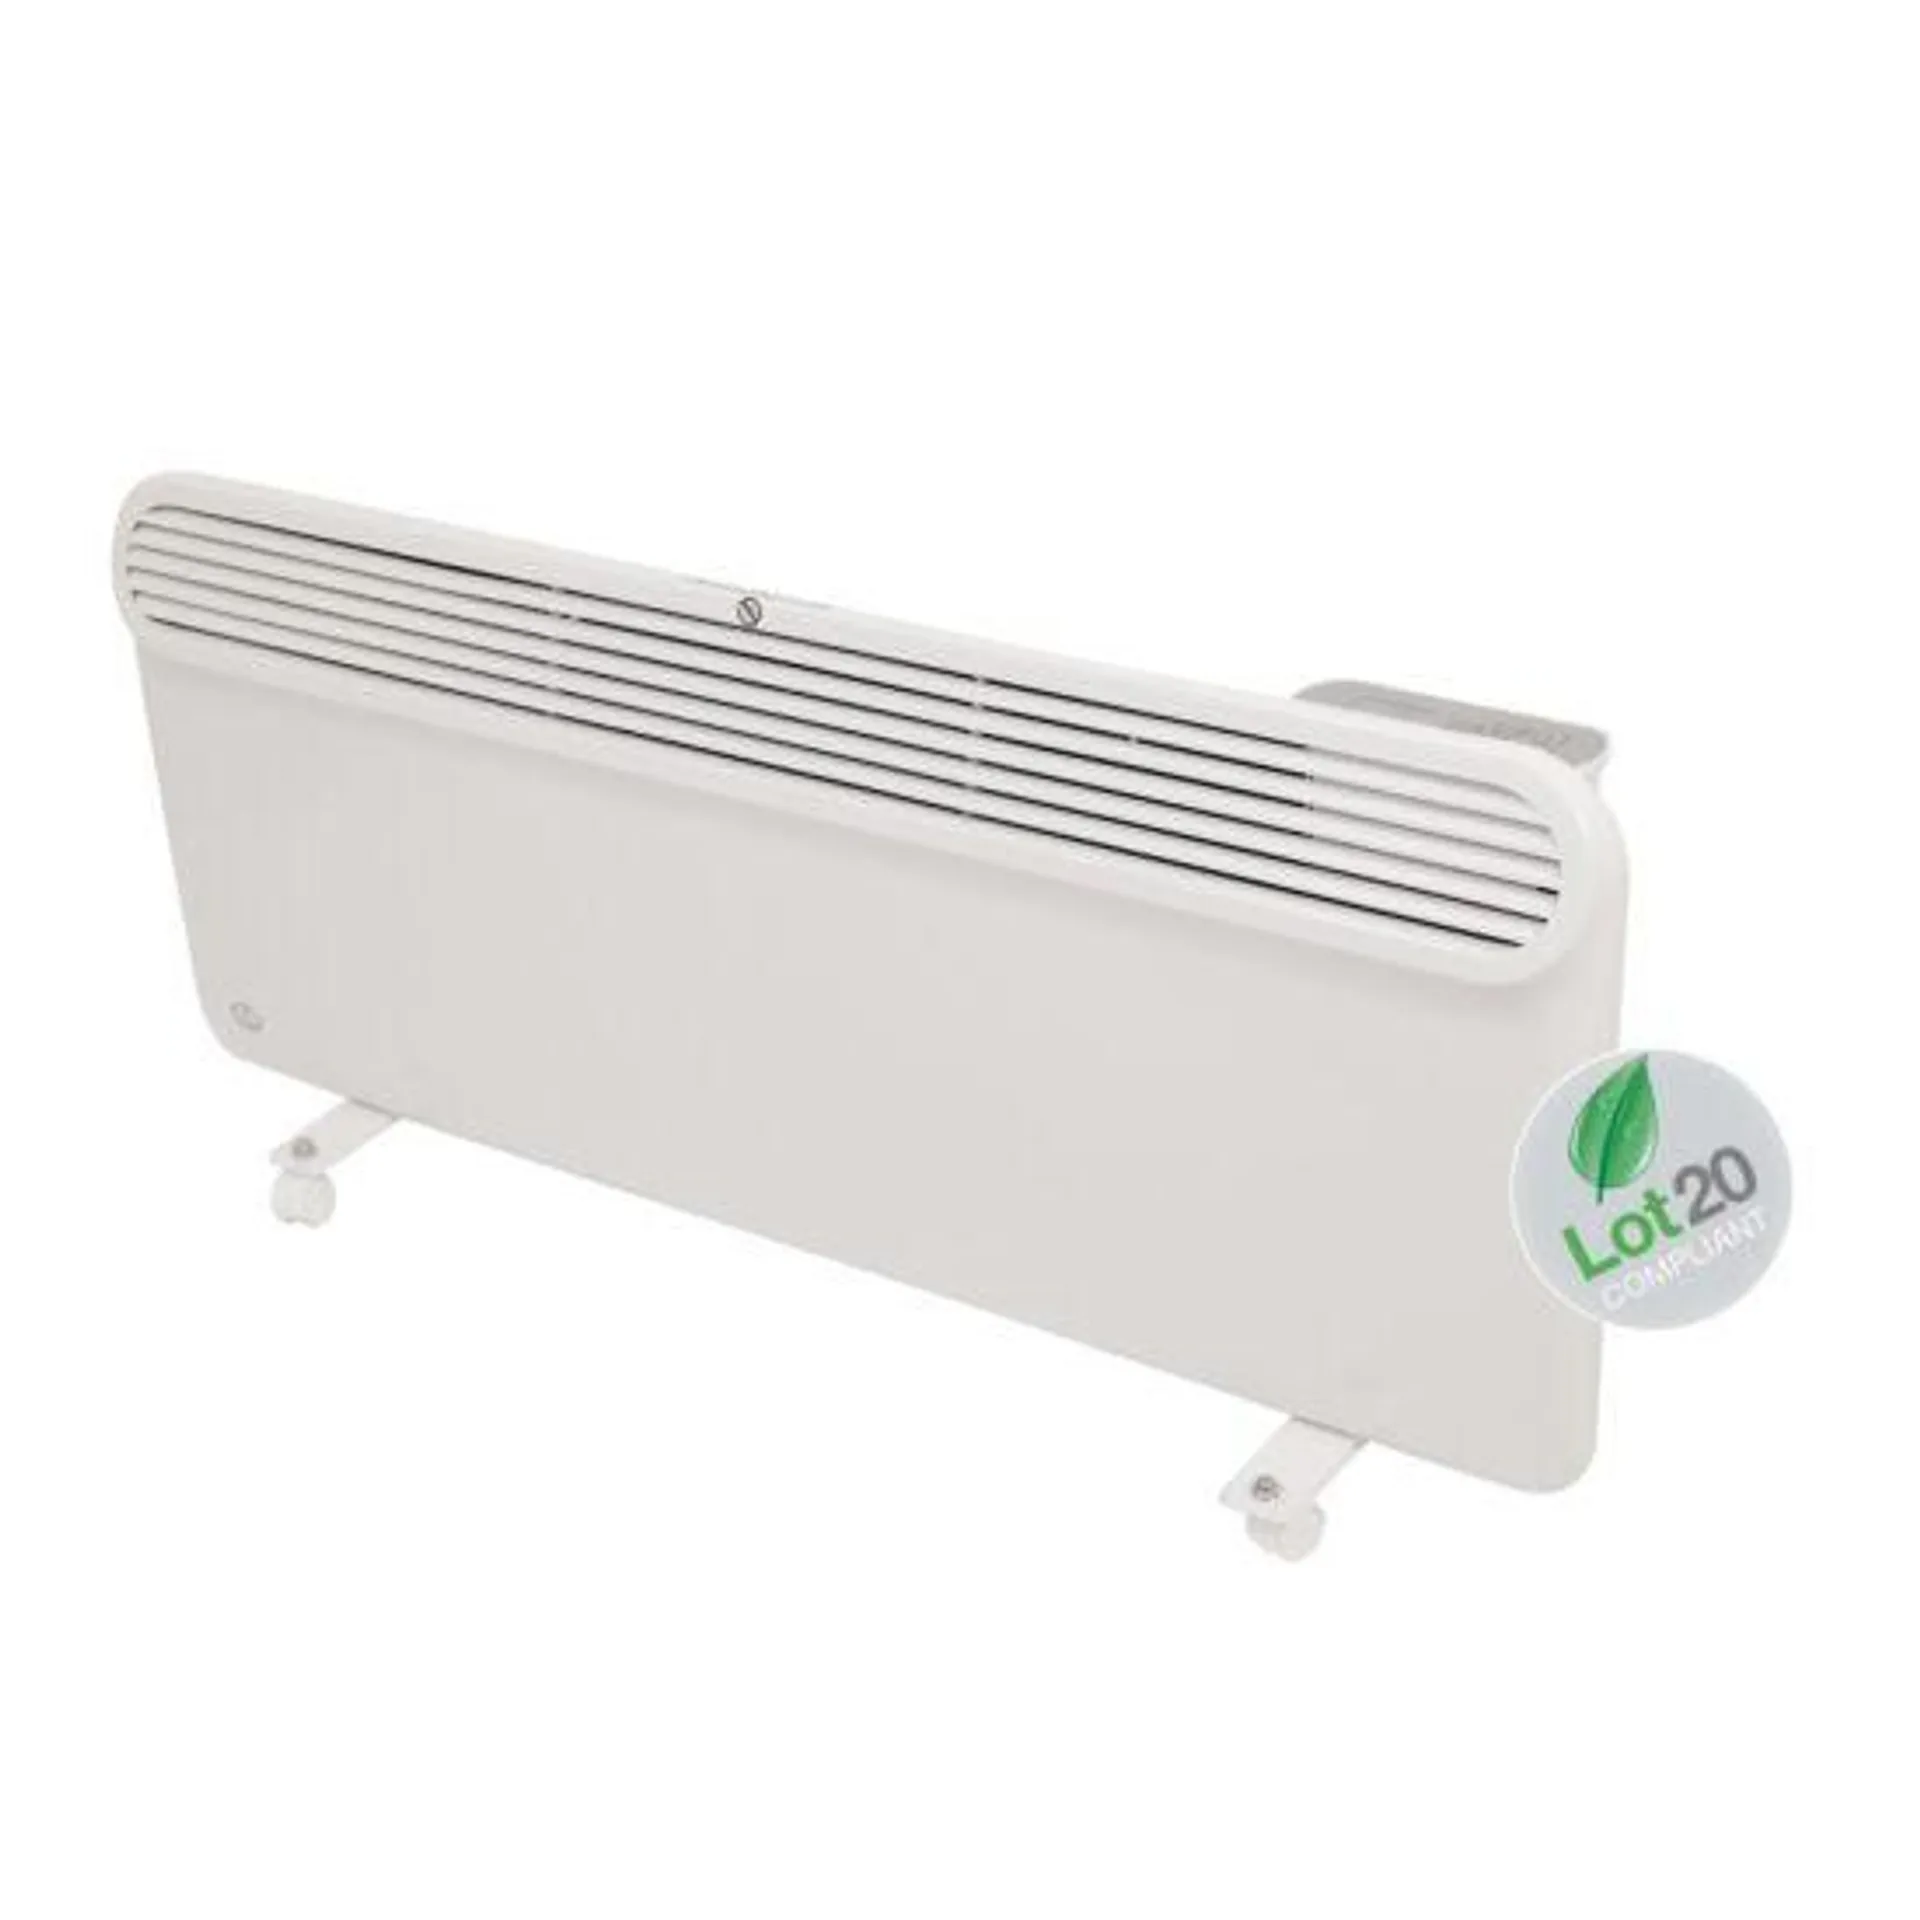 Prem-I-air Slimline Wall and Floor Mounting Programmable Panel Heater With Silent Operation 2.0Kw